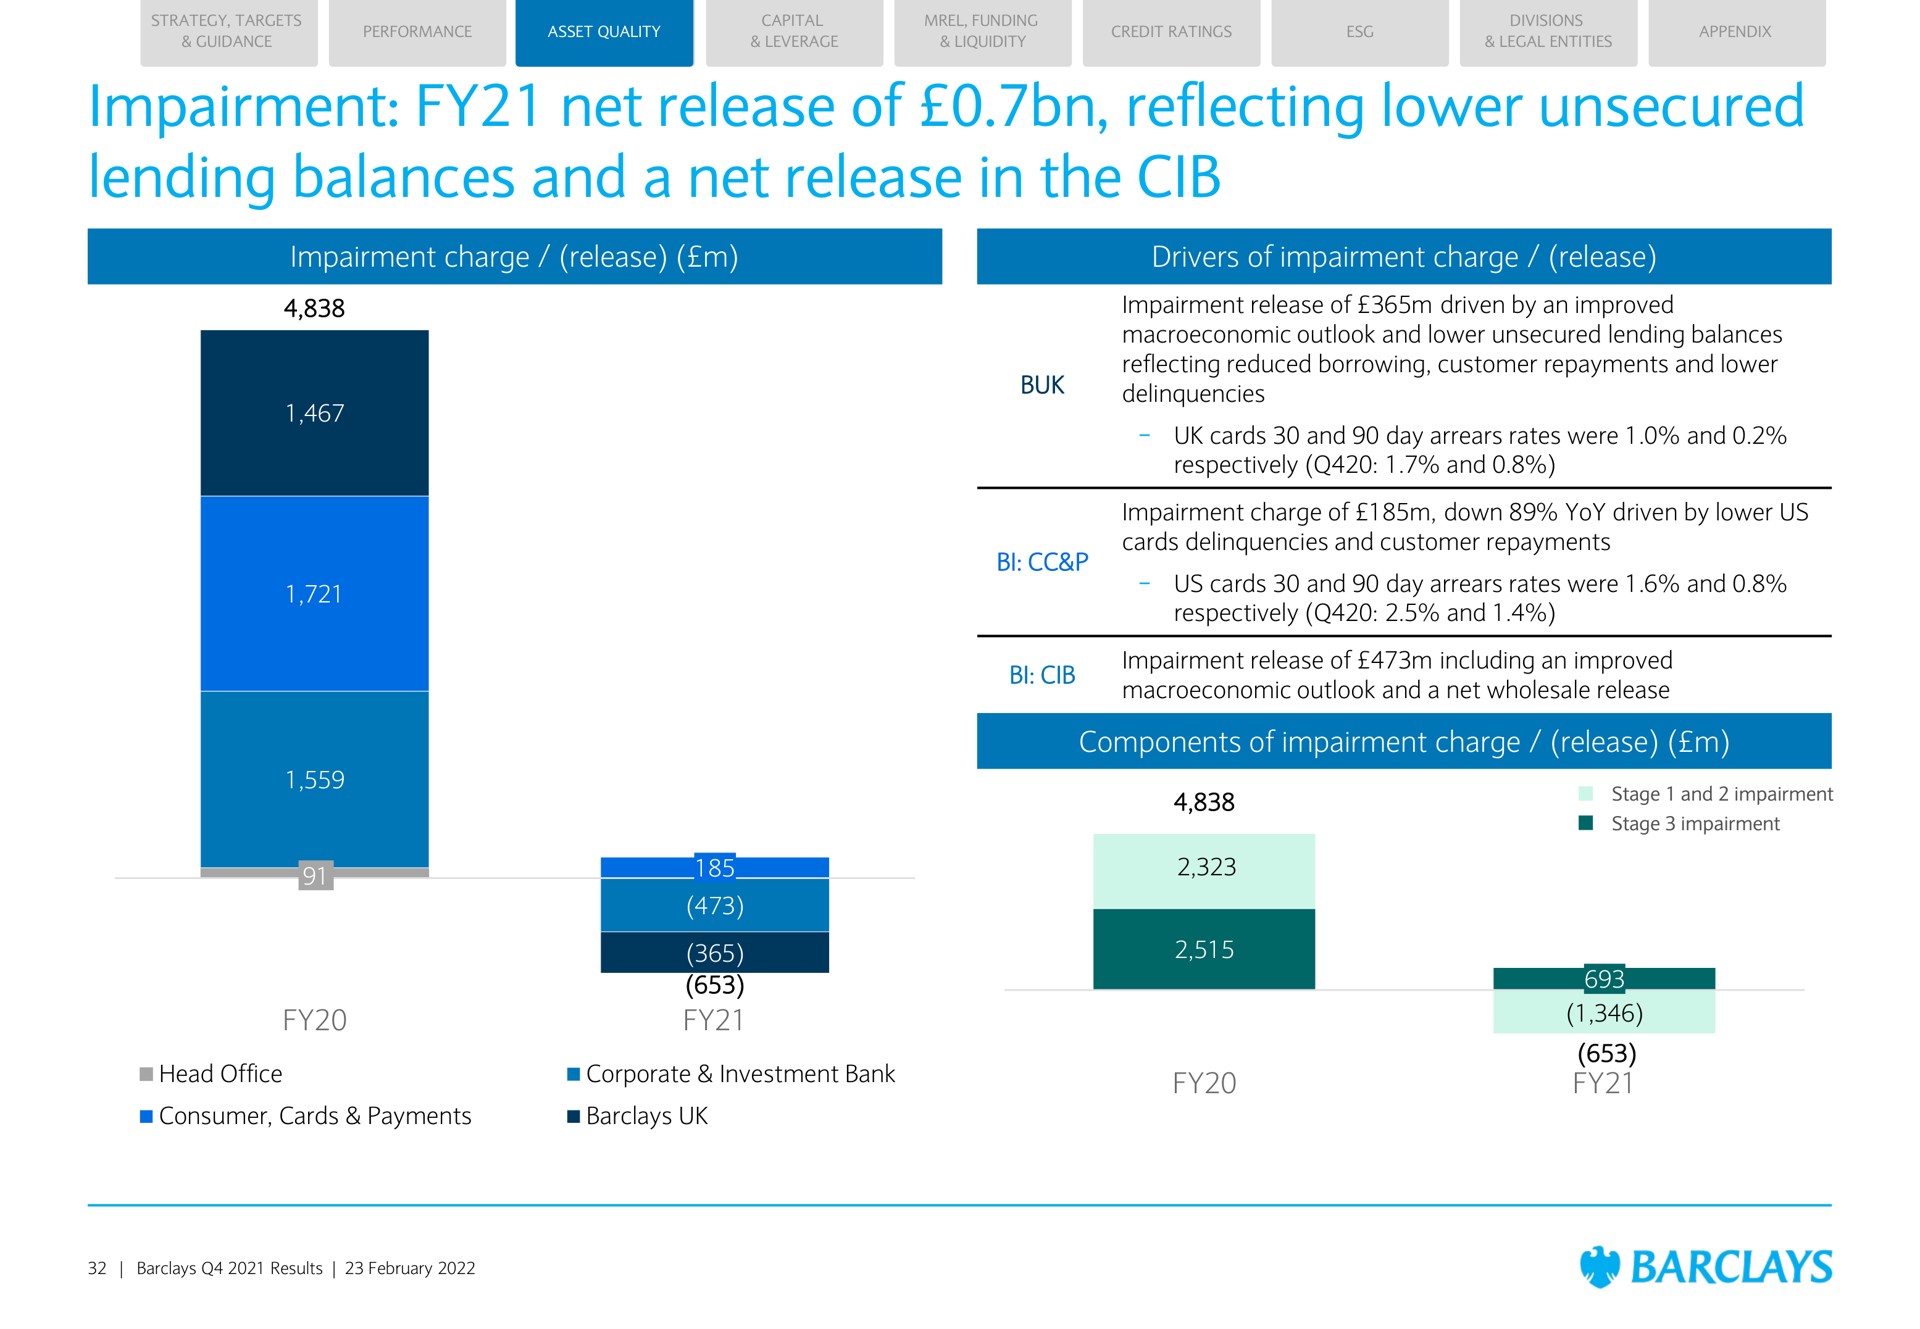 impairment net release of reflecting lower unsecured lending balances and a net release in the impairment charge release drivers of impairment charge release components of impairment charge release | Barclays